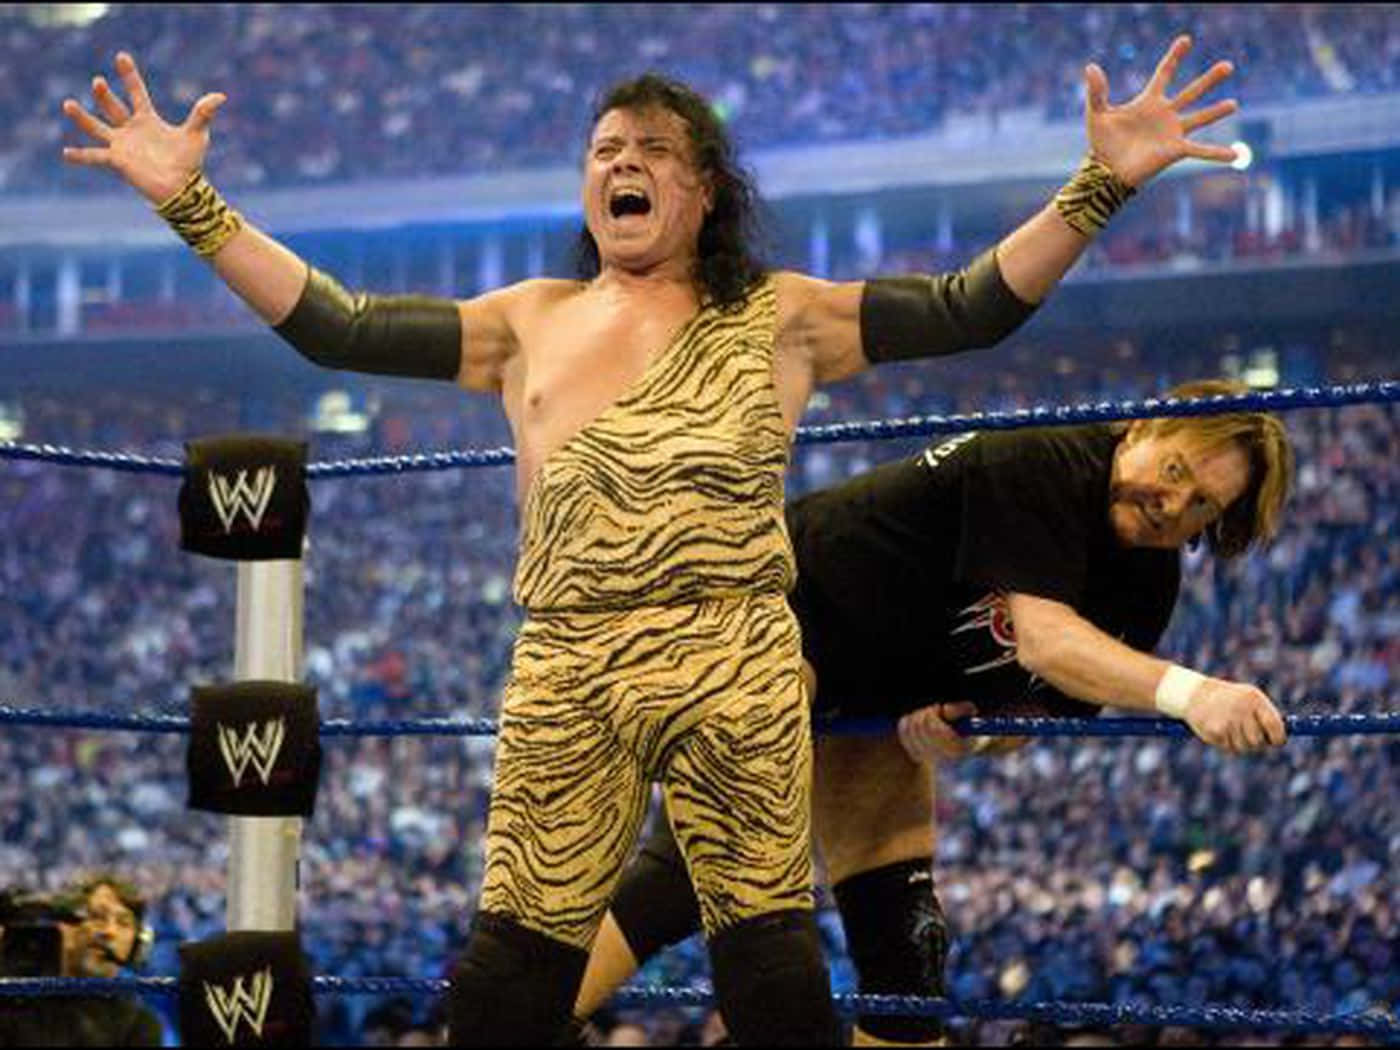 Wwes Hall Of Fame Jimmy Snuka - Wwe:s Hall Of Fame Jimmy Snuka (as A Suggestion For A Computer Or Mobile Wallpaper) Wallpaper